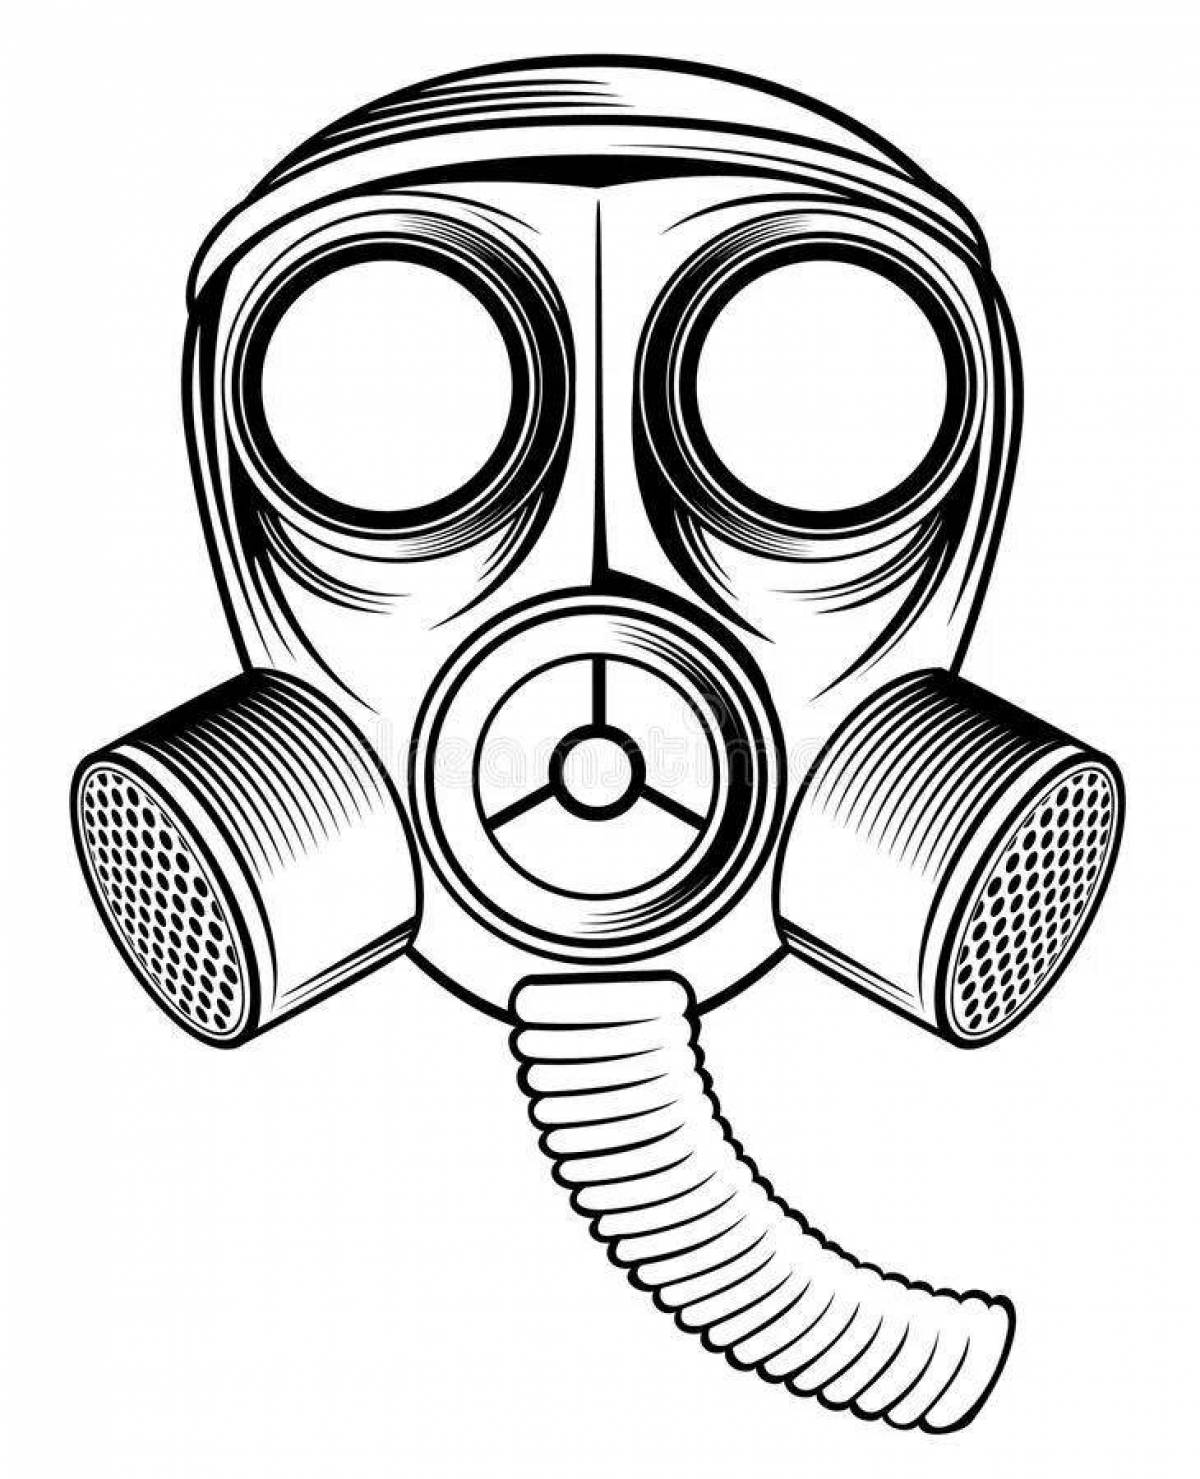 Exciting mask coloring page